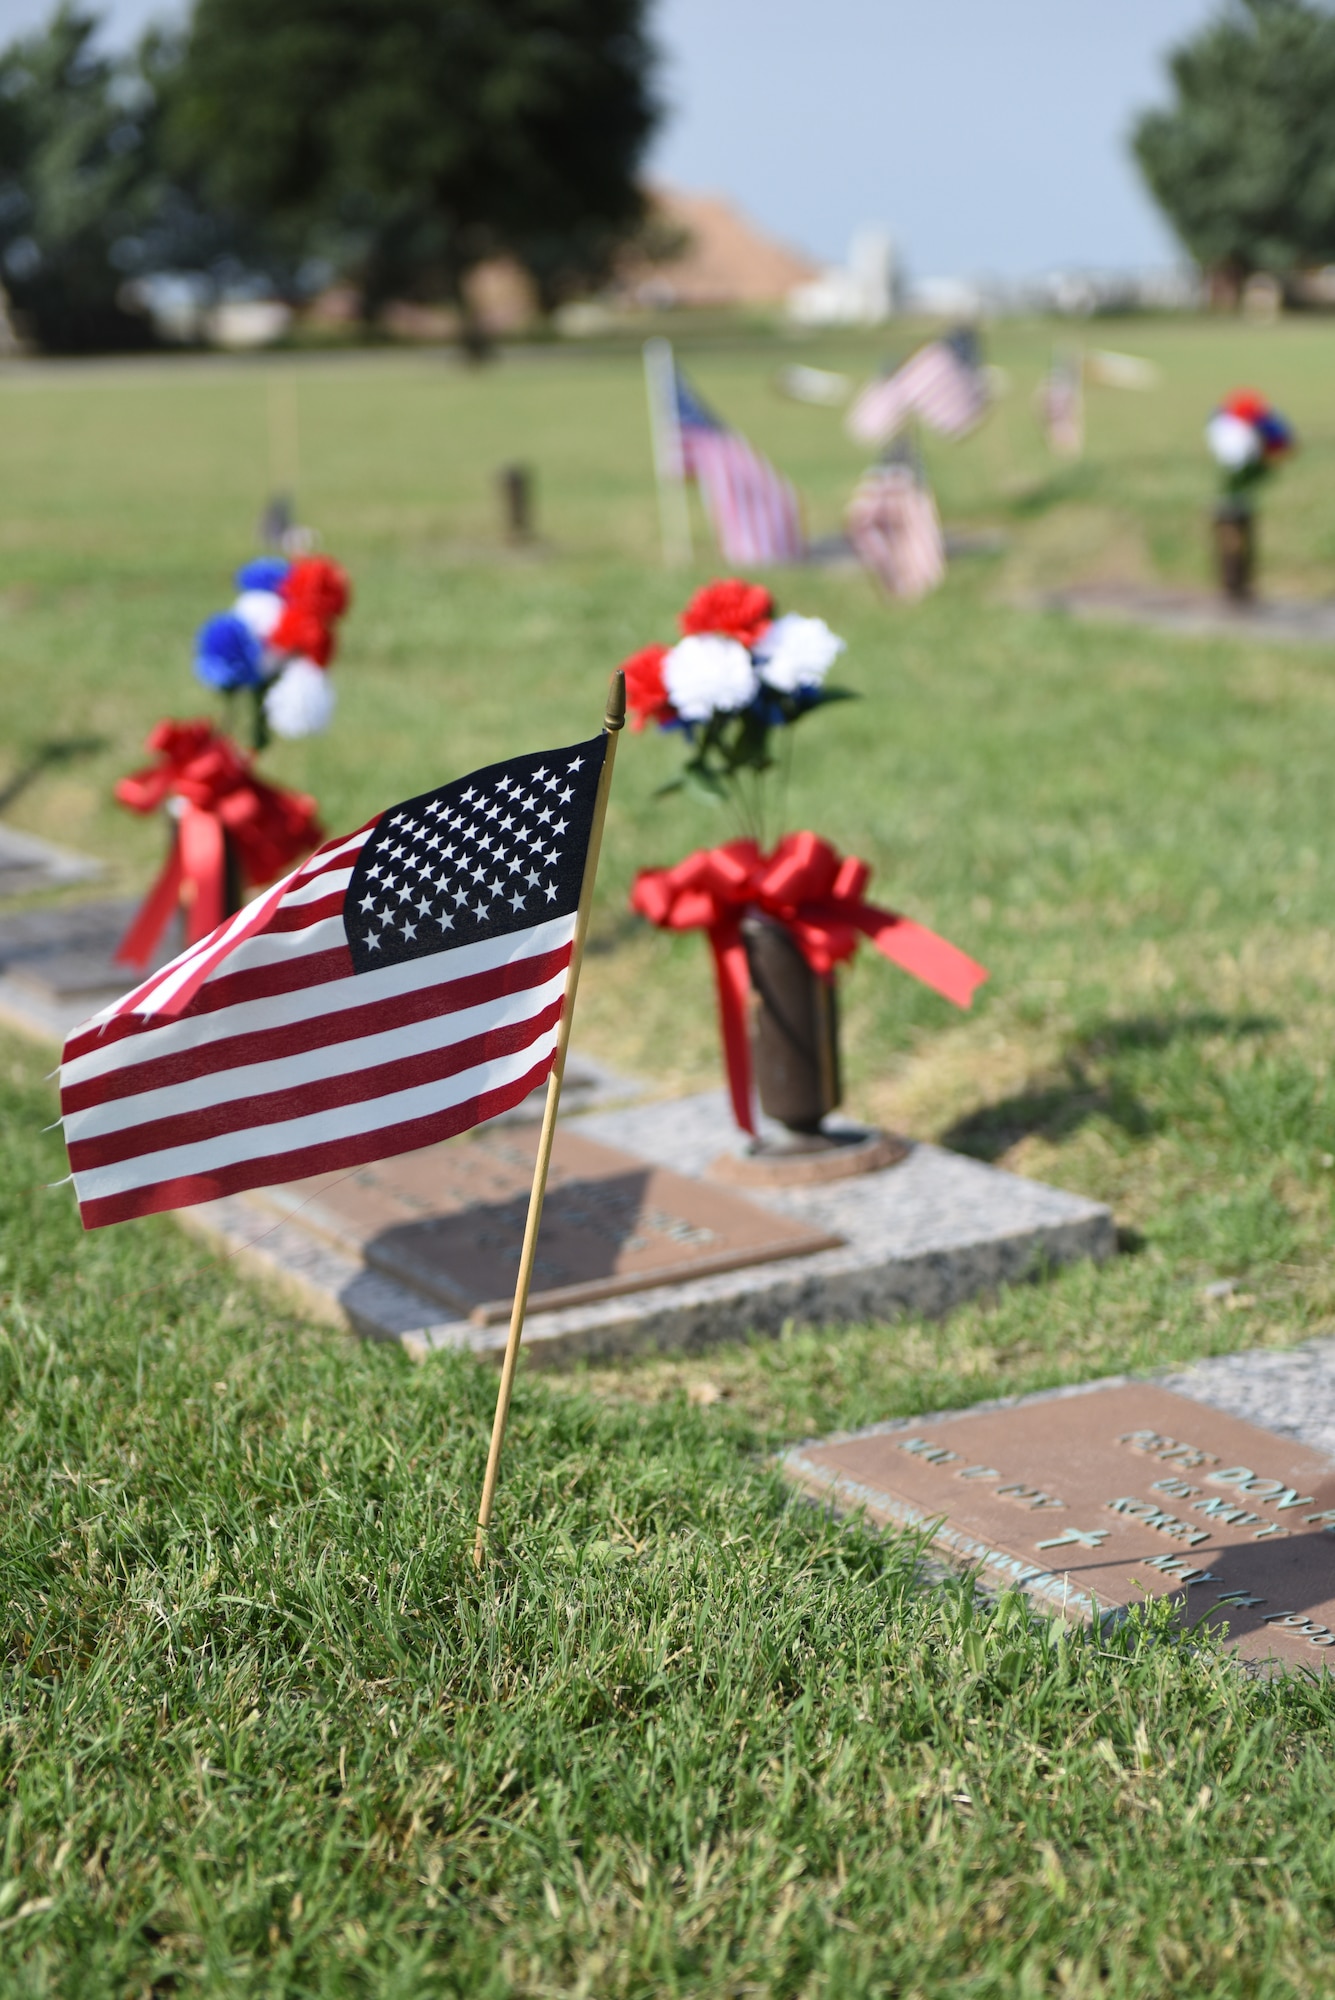 U.S. flags decorate the tombstones of service members during the eighth annual Lawnhaven Memorial Gardens Memorial Day Ceremony in San Angelo, Texas, May 27, 2019. The ceremony was held to honor the service and sacrifice of fallen armed forces members. (U.S. Air Force photo by Senior Airman Seraiah Hines/Released)